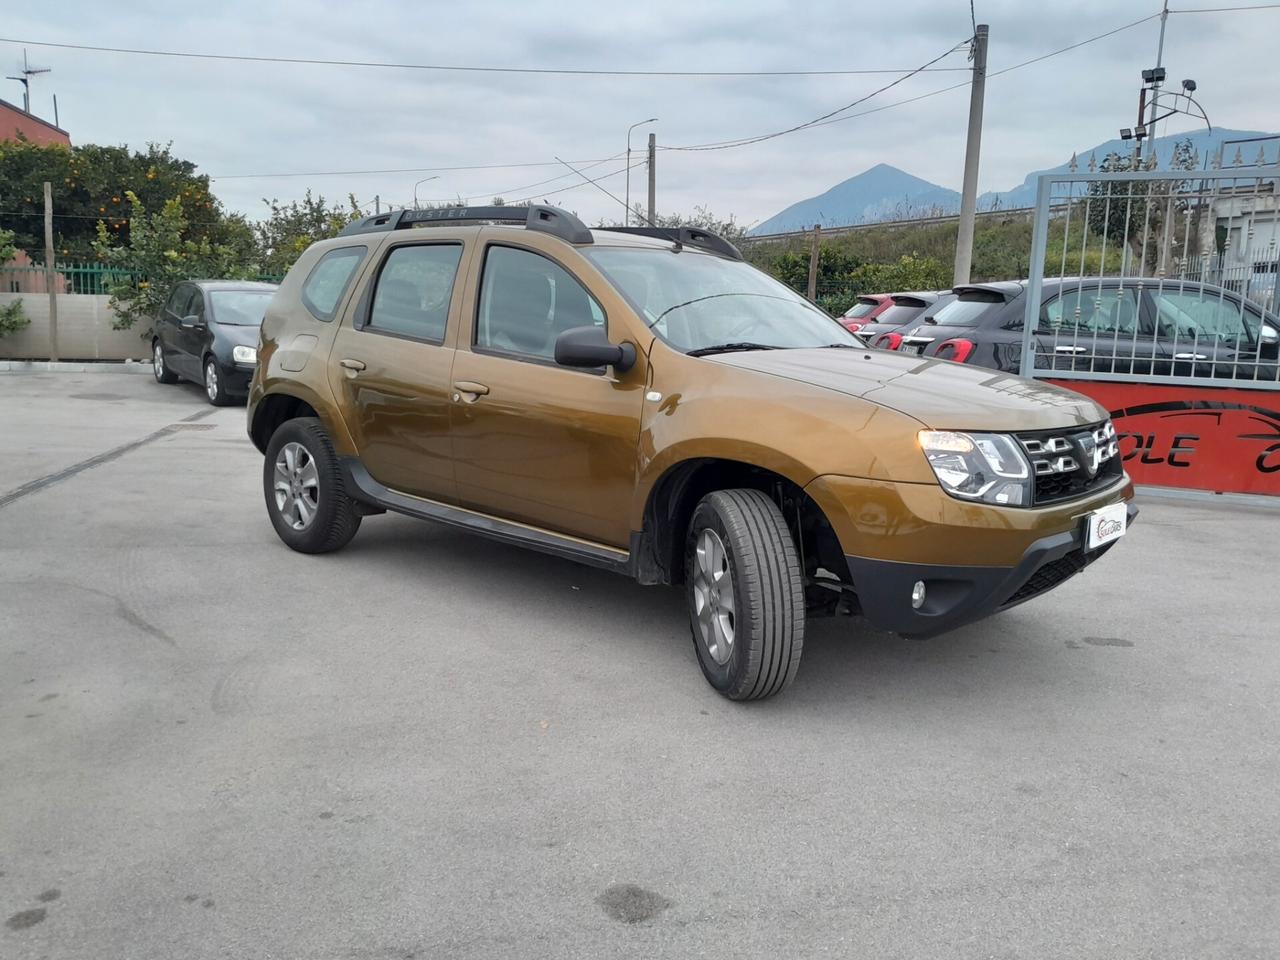 Dacia Duster 1.5 dCi 110CV S&S 4x2 Serie Speciale Lauréate Family